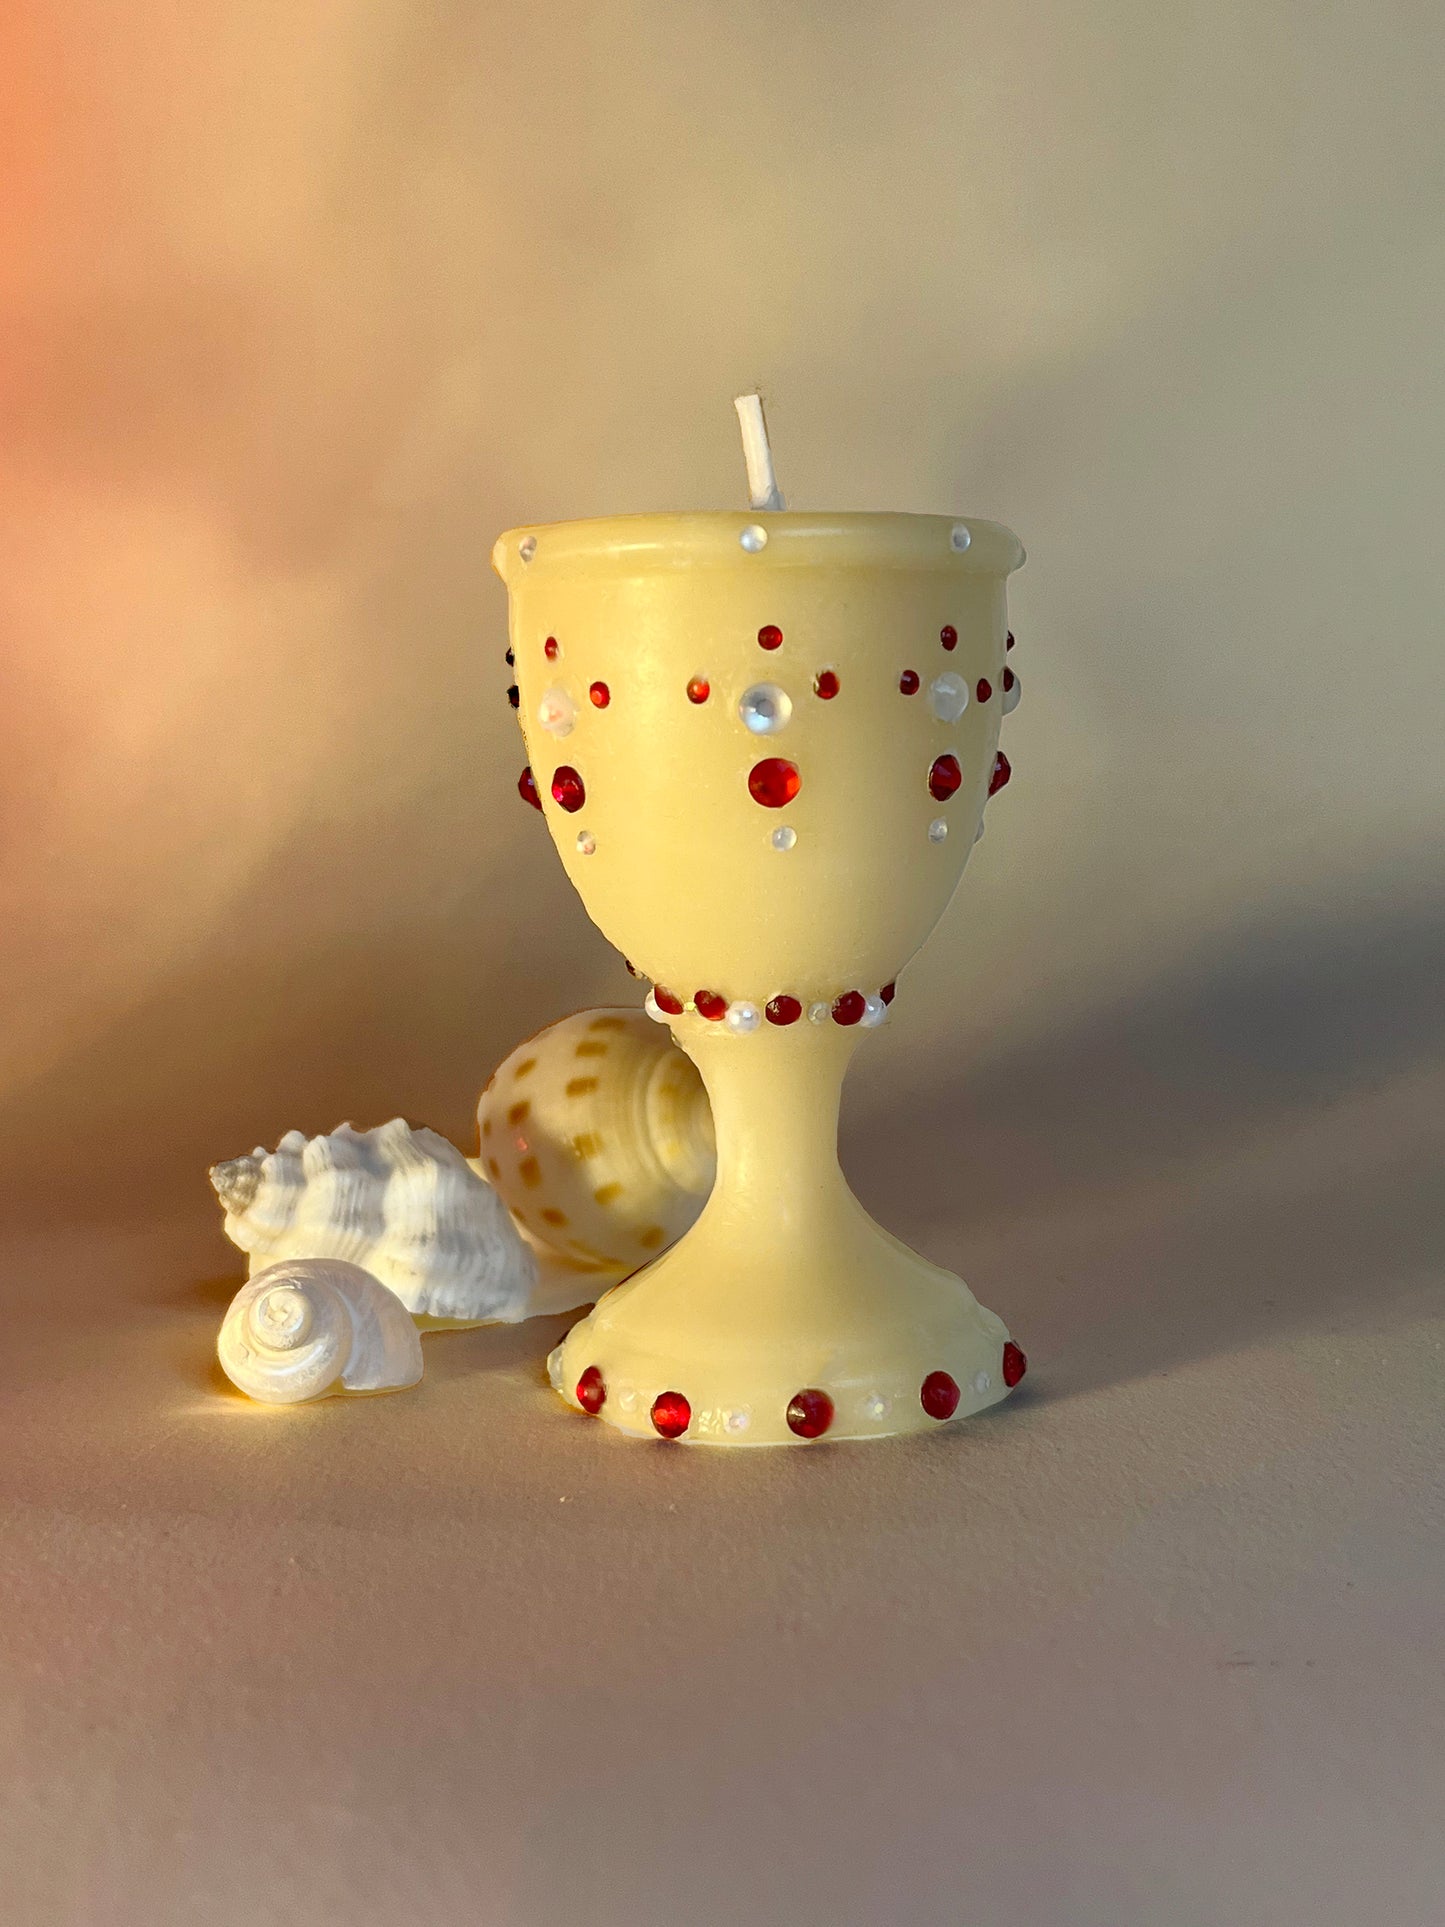 An adorned drinking vessel, shaped like a Victorian wine glass with red and iridescent gemstones. Hand-poured and made from 100% beeswax. Small-batch and a perfect gift for someone looking for an artisanal candle that is eco-friendly and non-toxic.